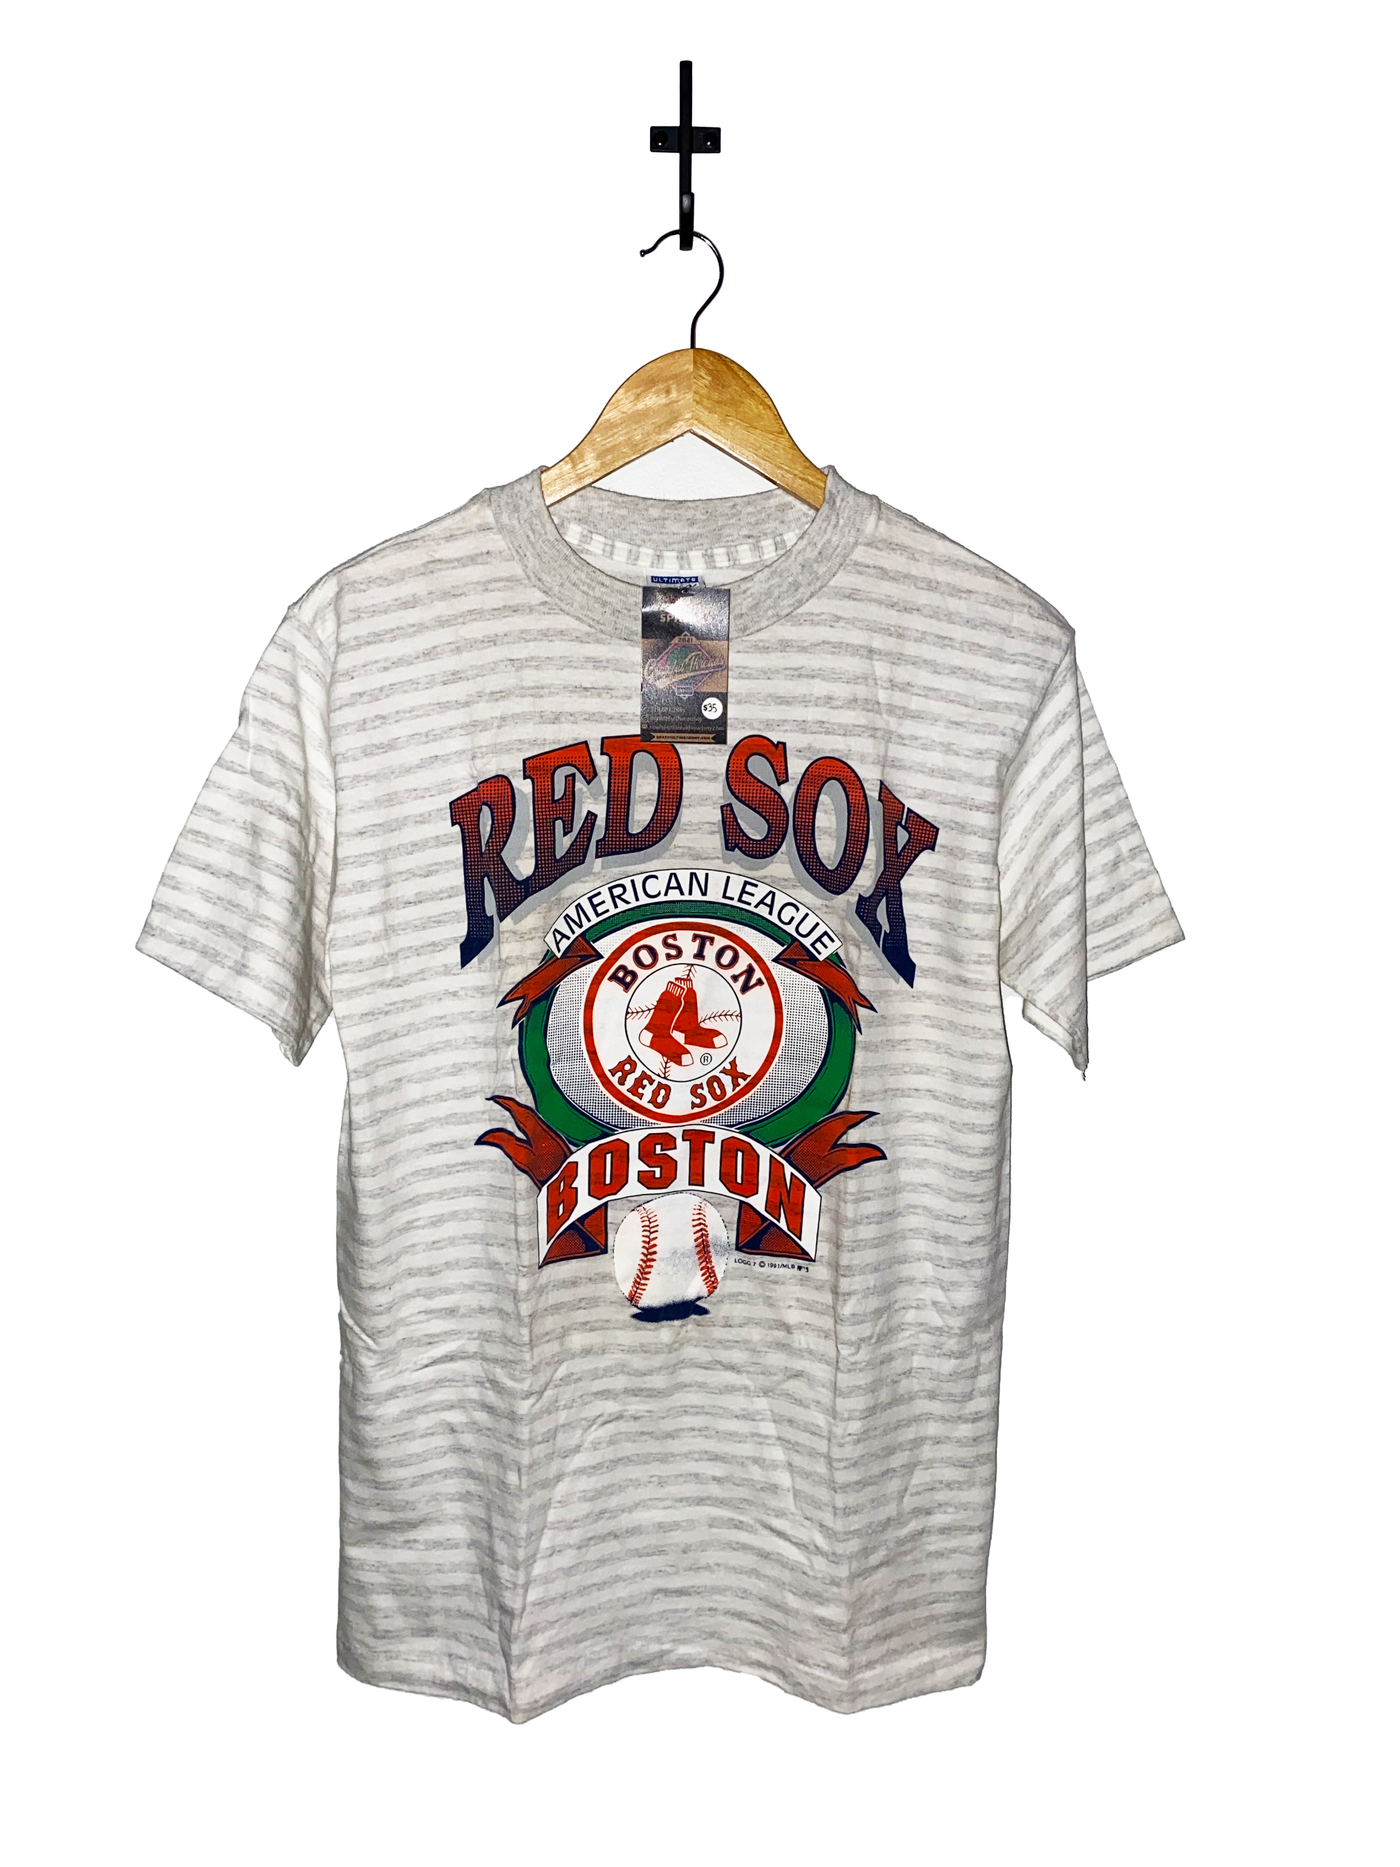 Vintage 1991 Red Sox T-Shirt